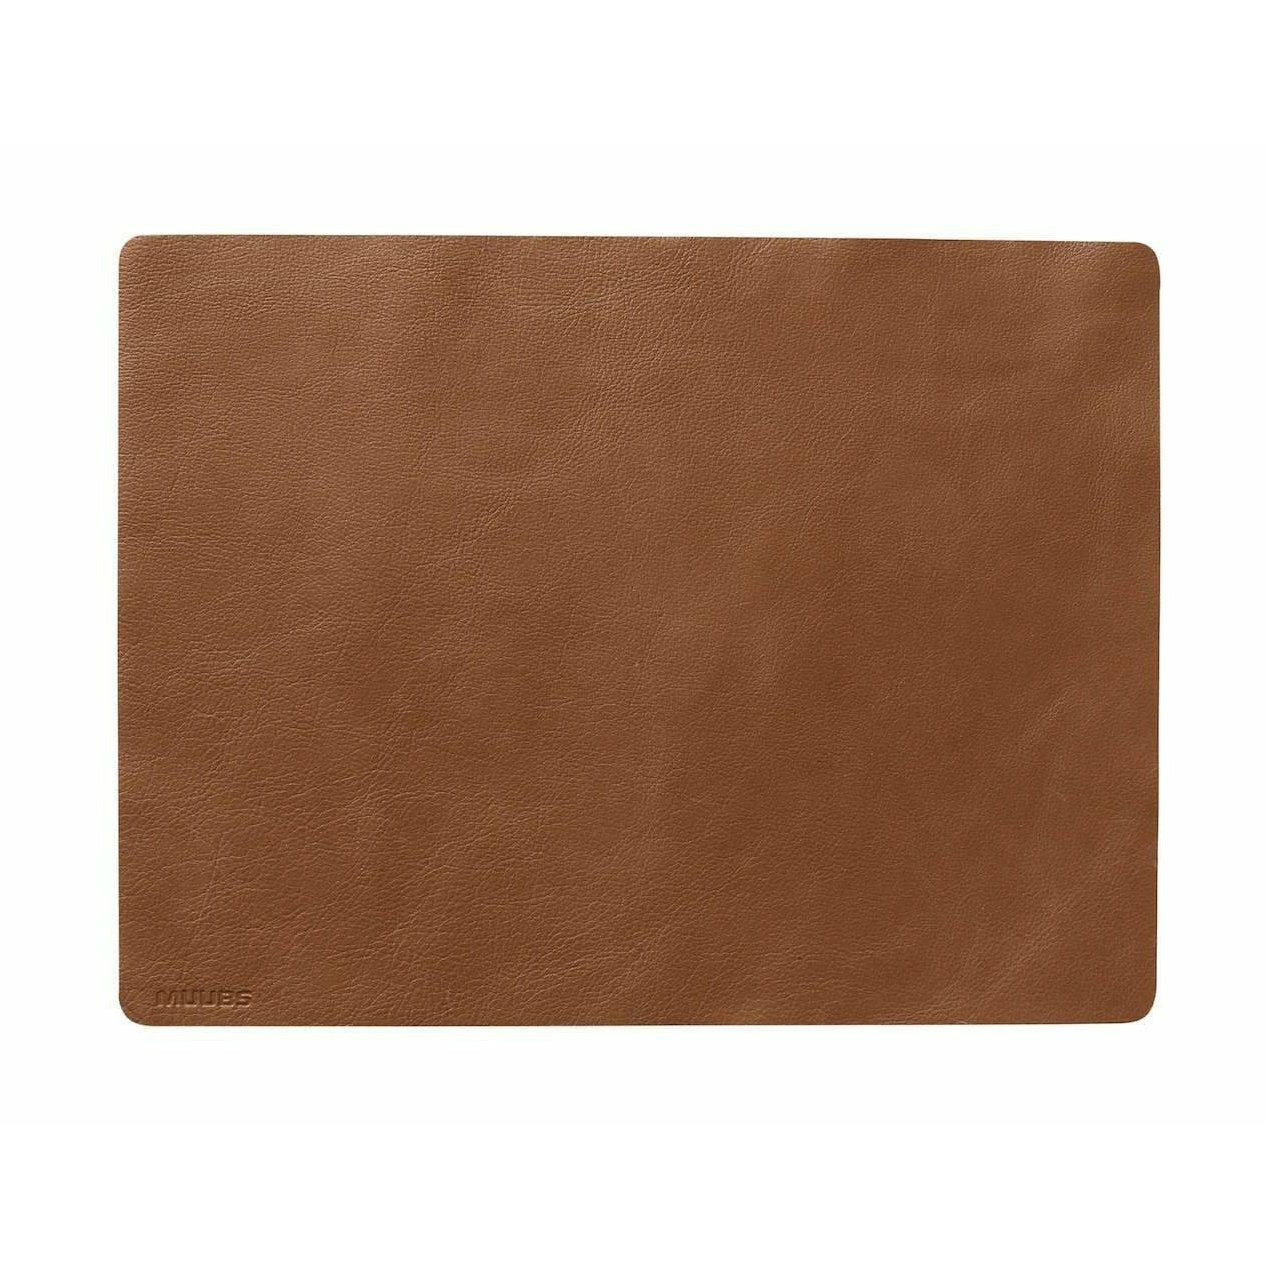 Muubs Camou Placemat 45 cm, cuir marron